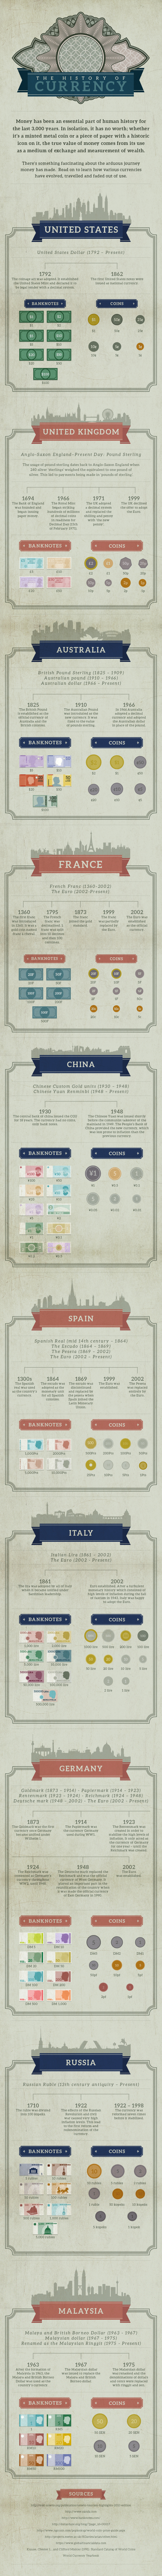 The history of currency